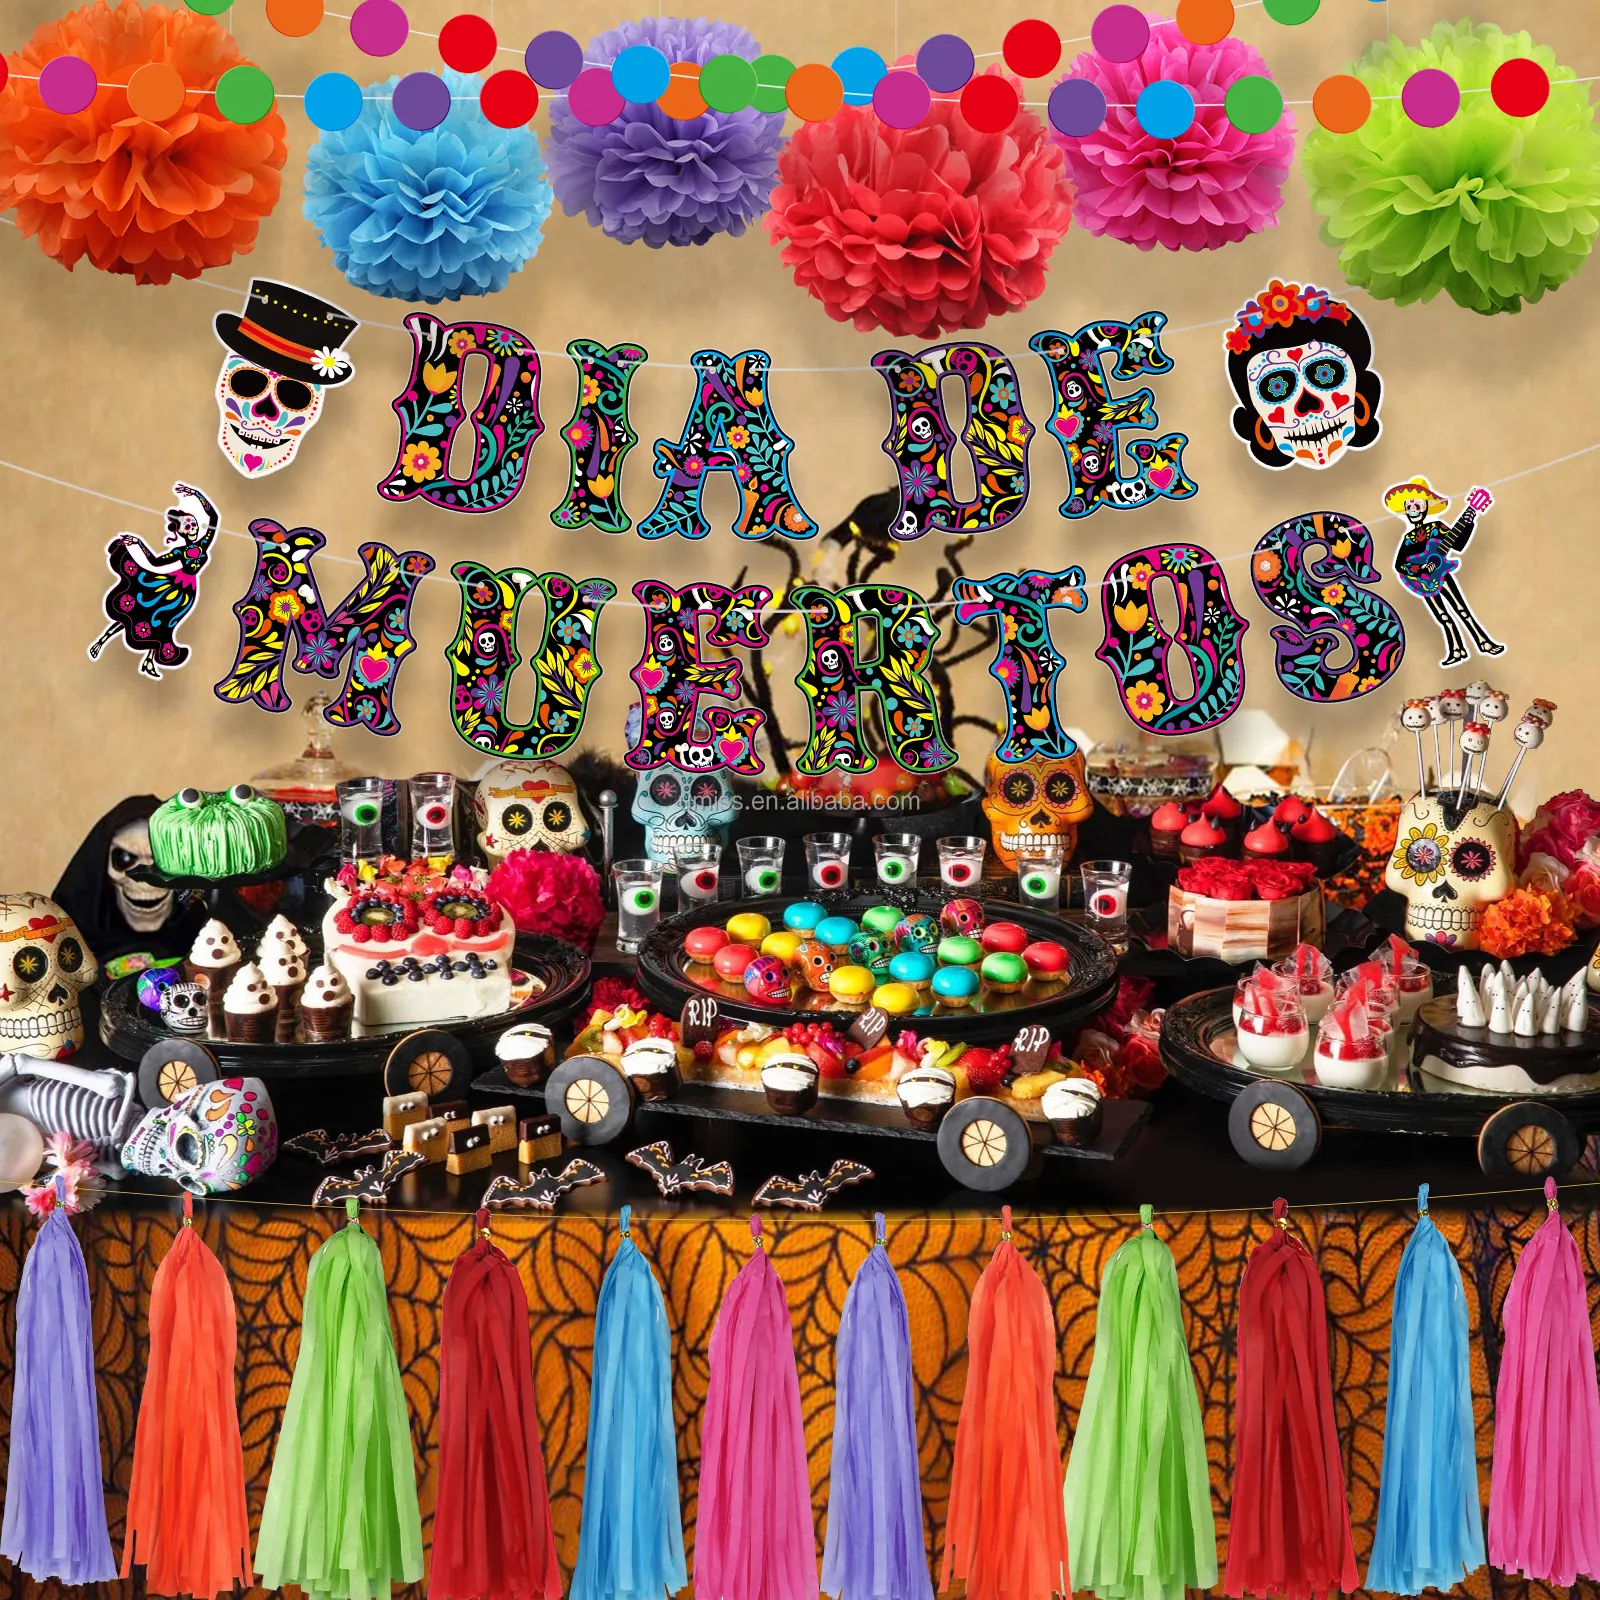 Umiss DIA DE MUERTOS Party Decorations paper pompom with banners and garland for Day of the Dead